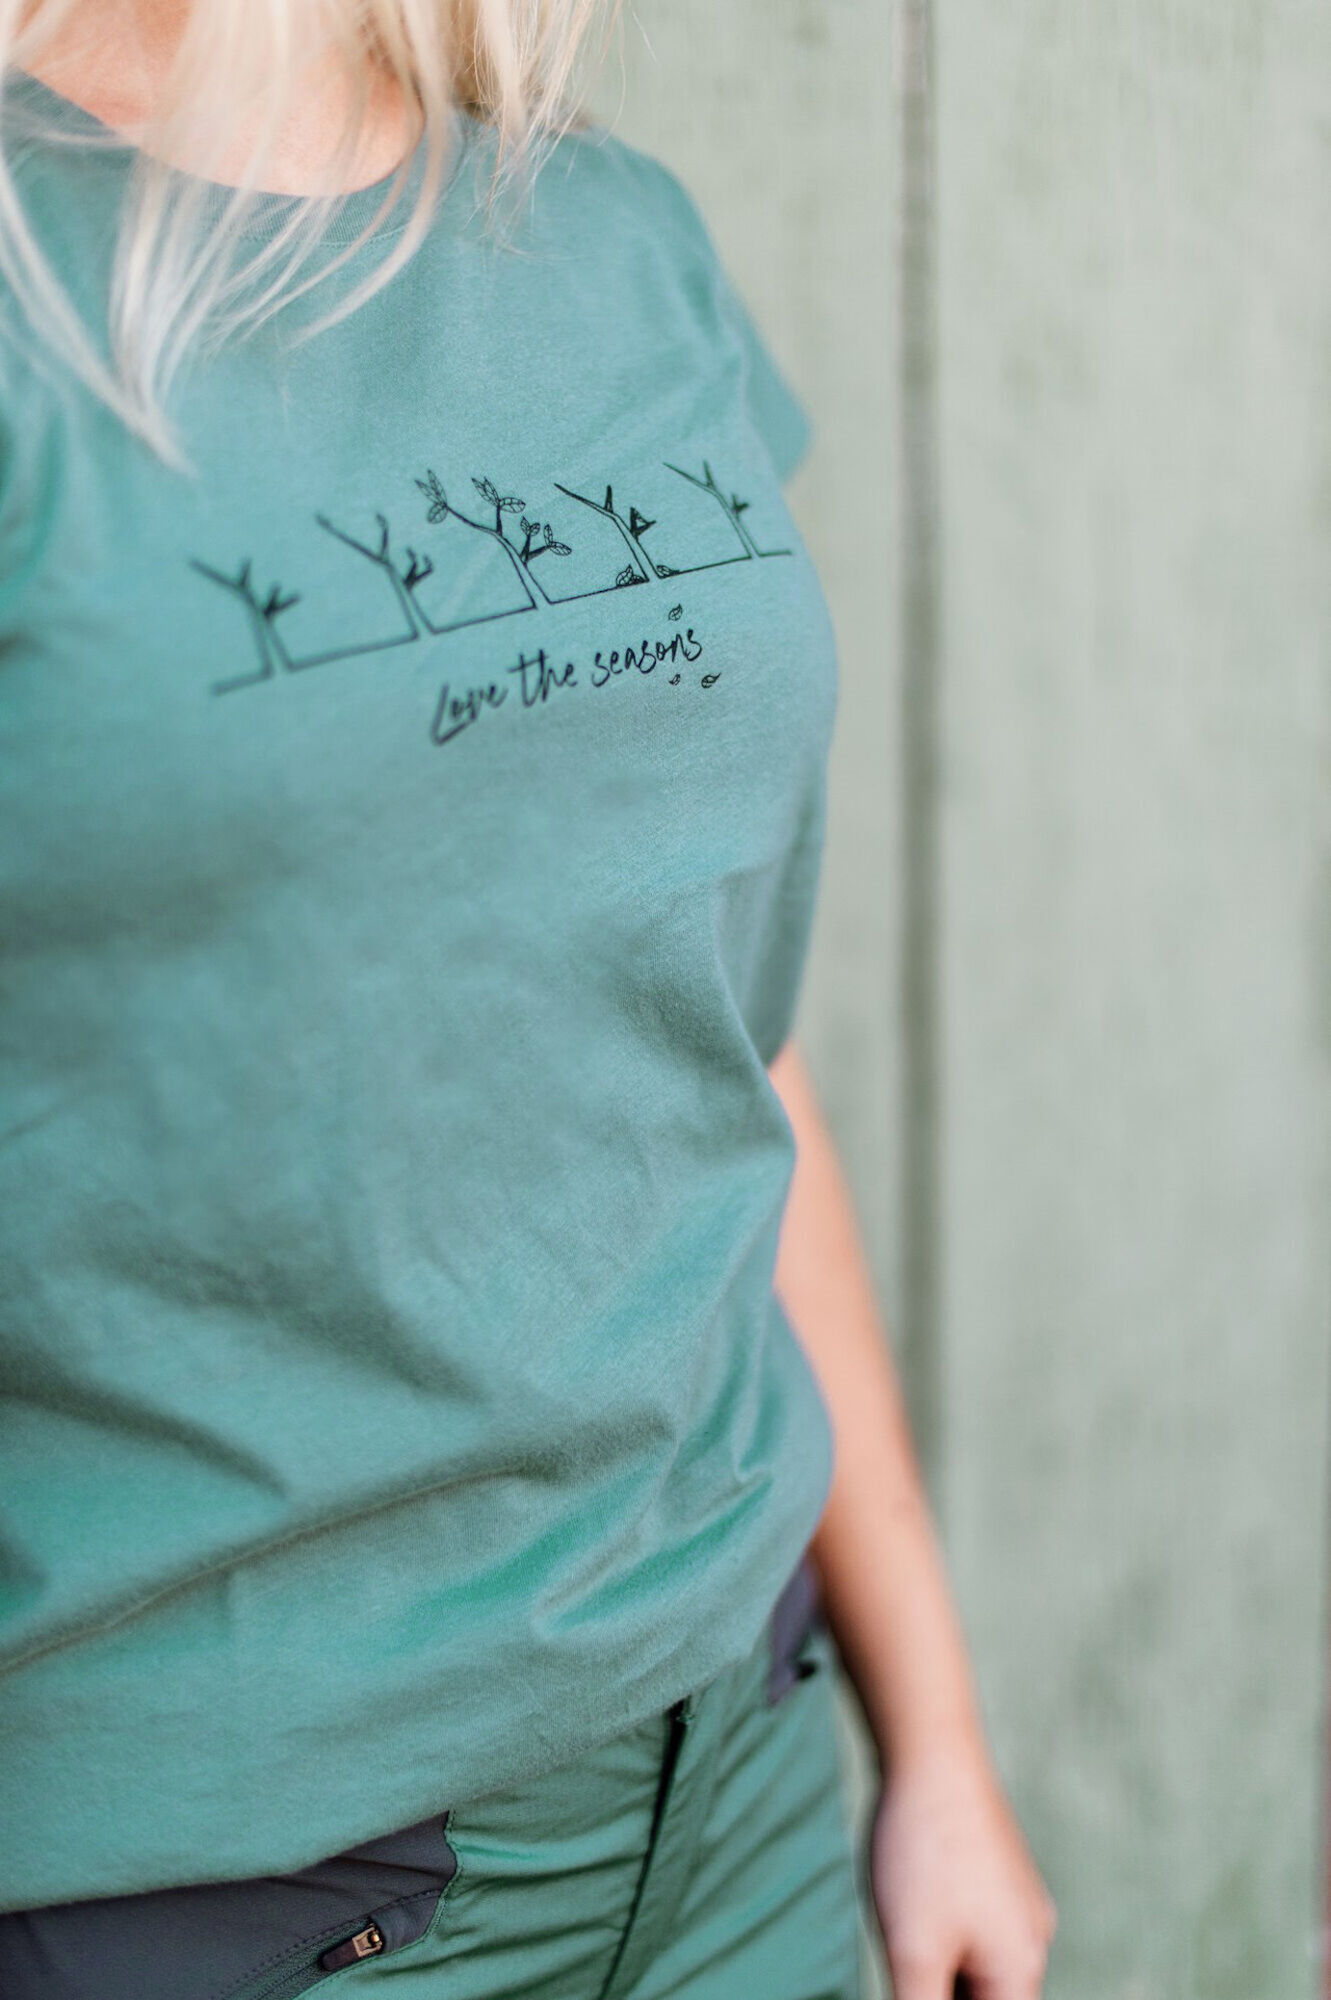 A woman wearing a t-shirt with writing on it.